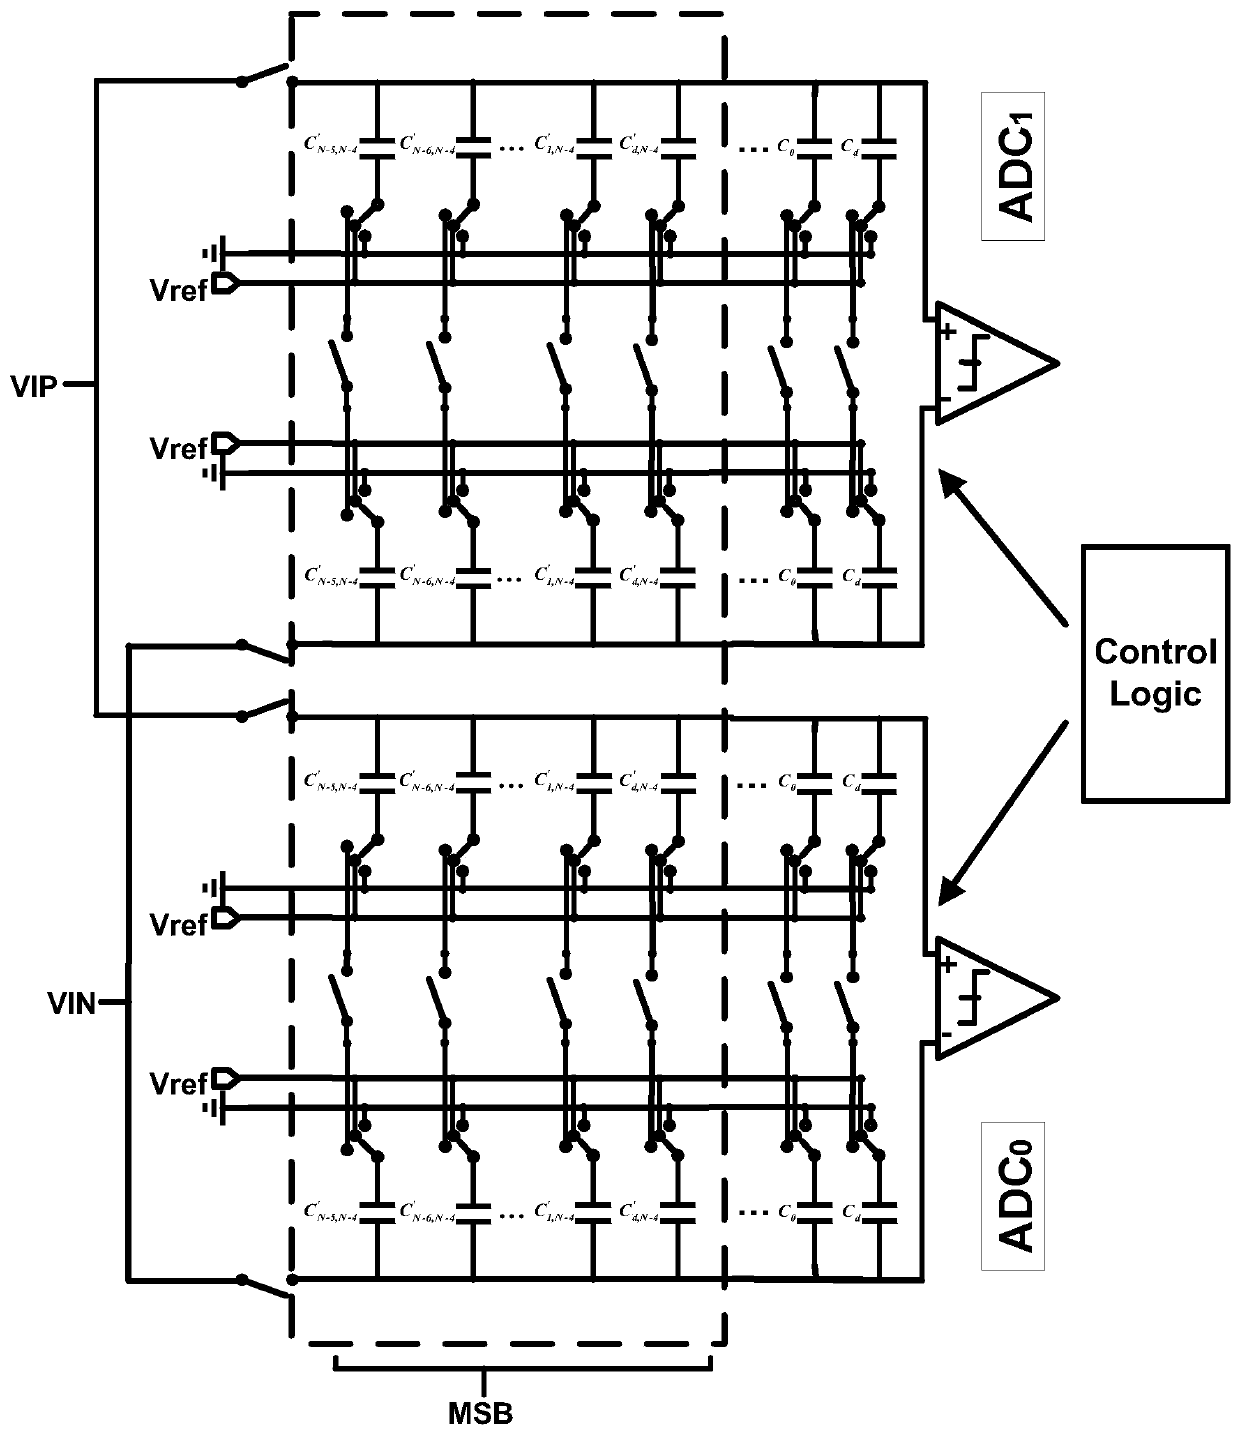 Capacitor array switching method applied to low-voltage SAR ADC